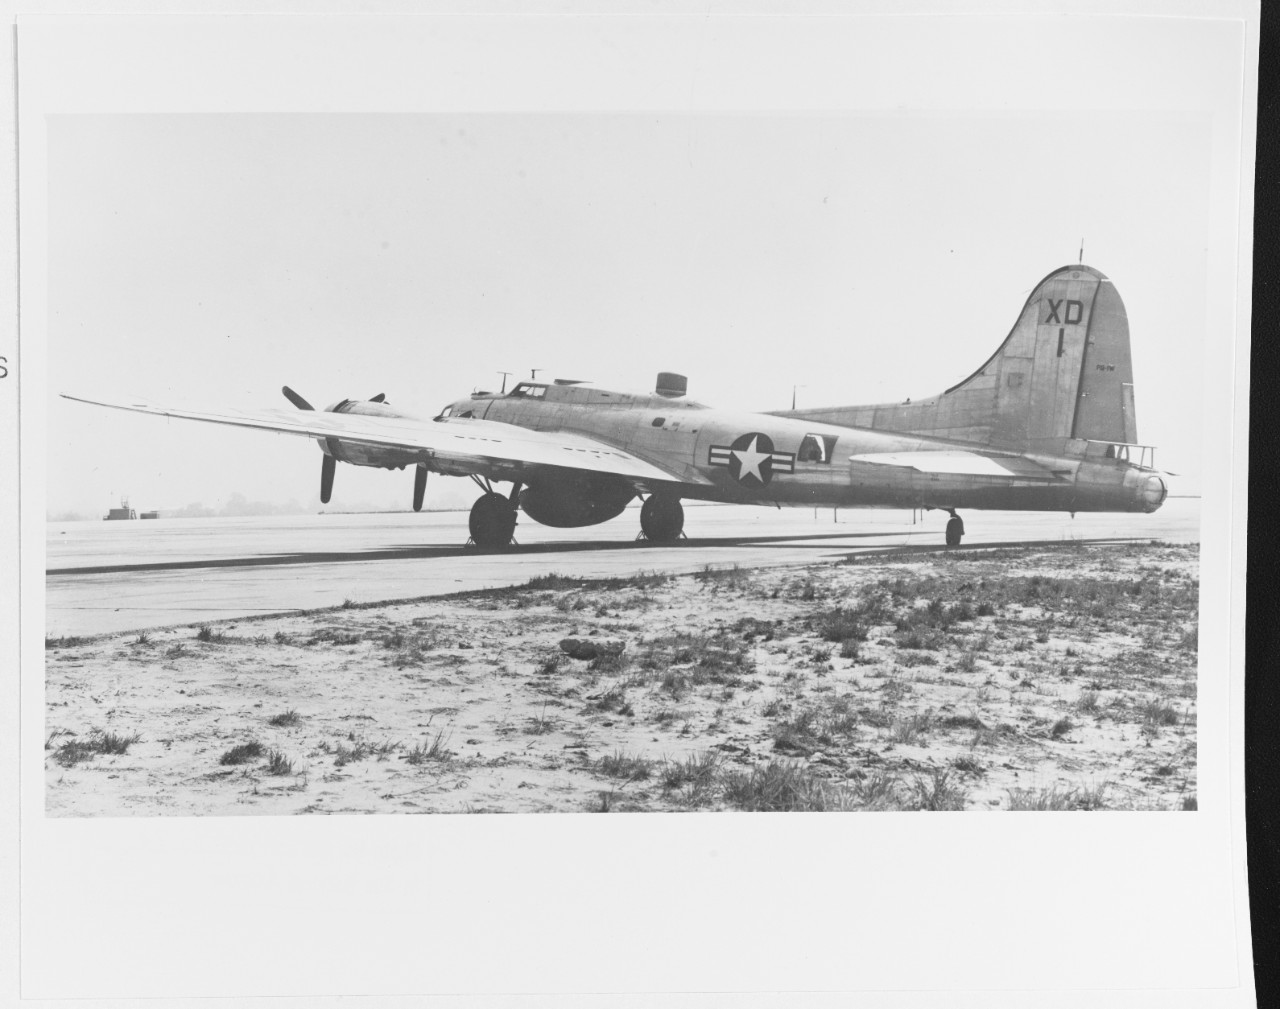 PB-1W Patrol Plane on the ground at NAS Patuxent River, Maryland, 25 May 1949. Plane is Bureau number 77235.